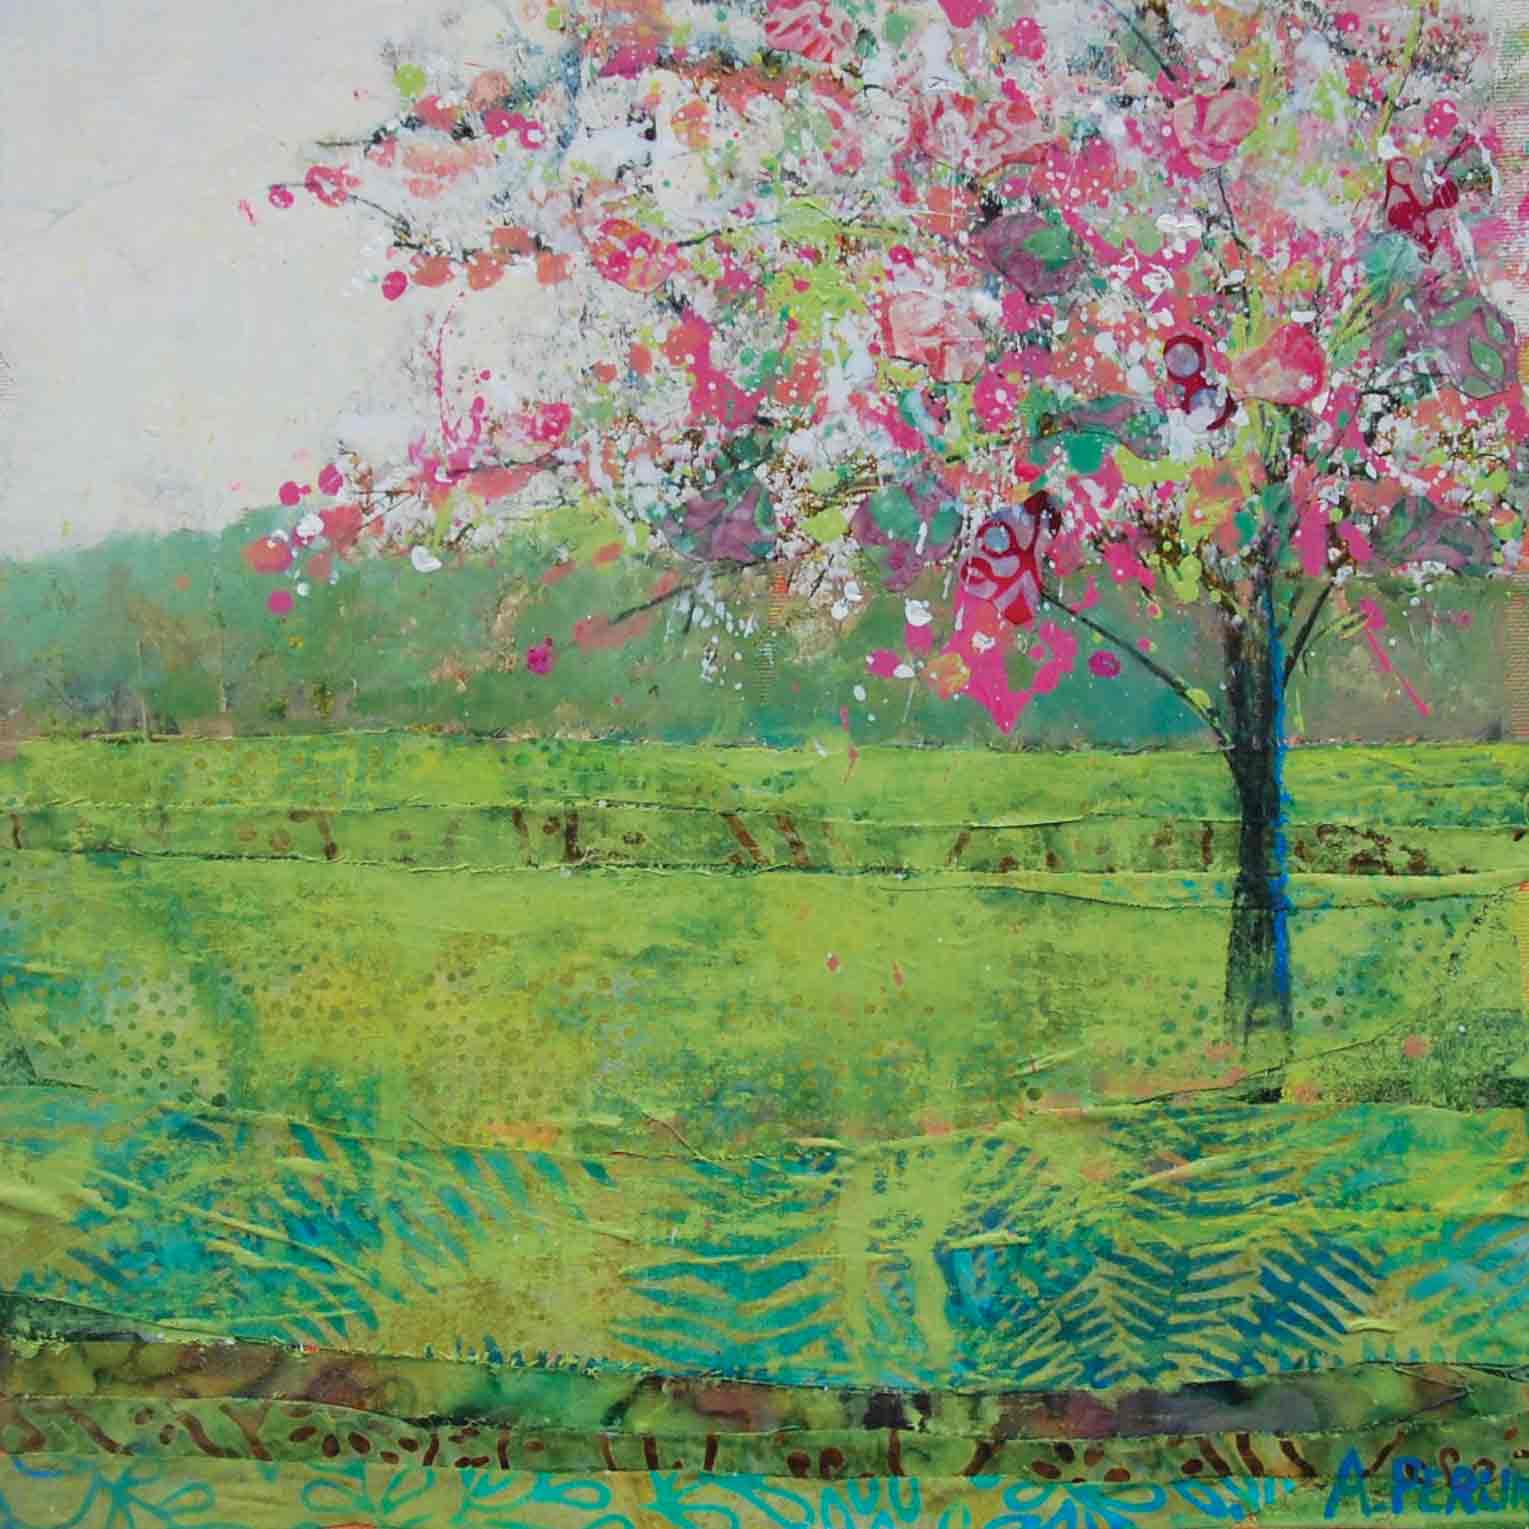 Art Greeting Card by Anna Perlin, Spring at Last, Mixed Media, Blossom tree in green field